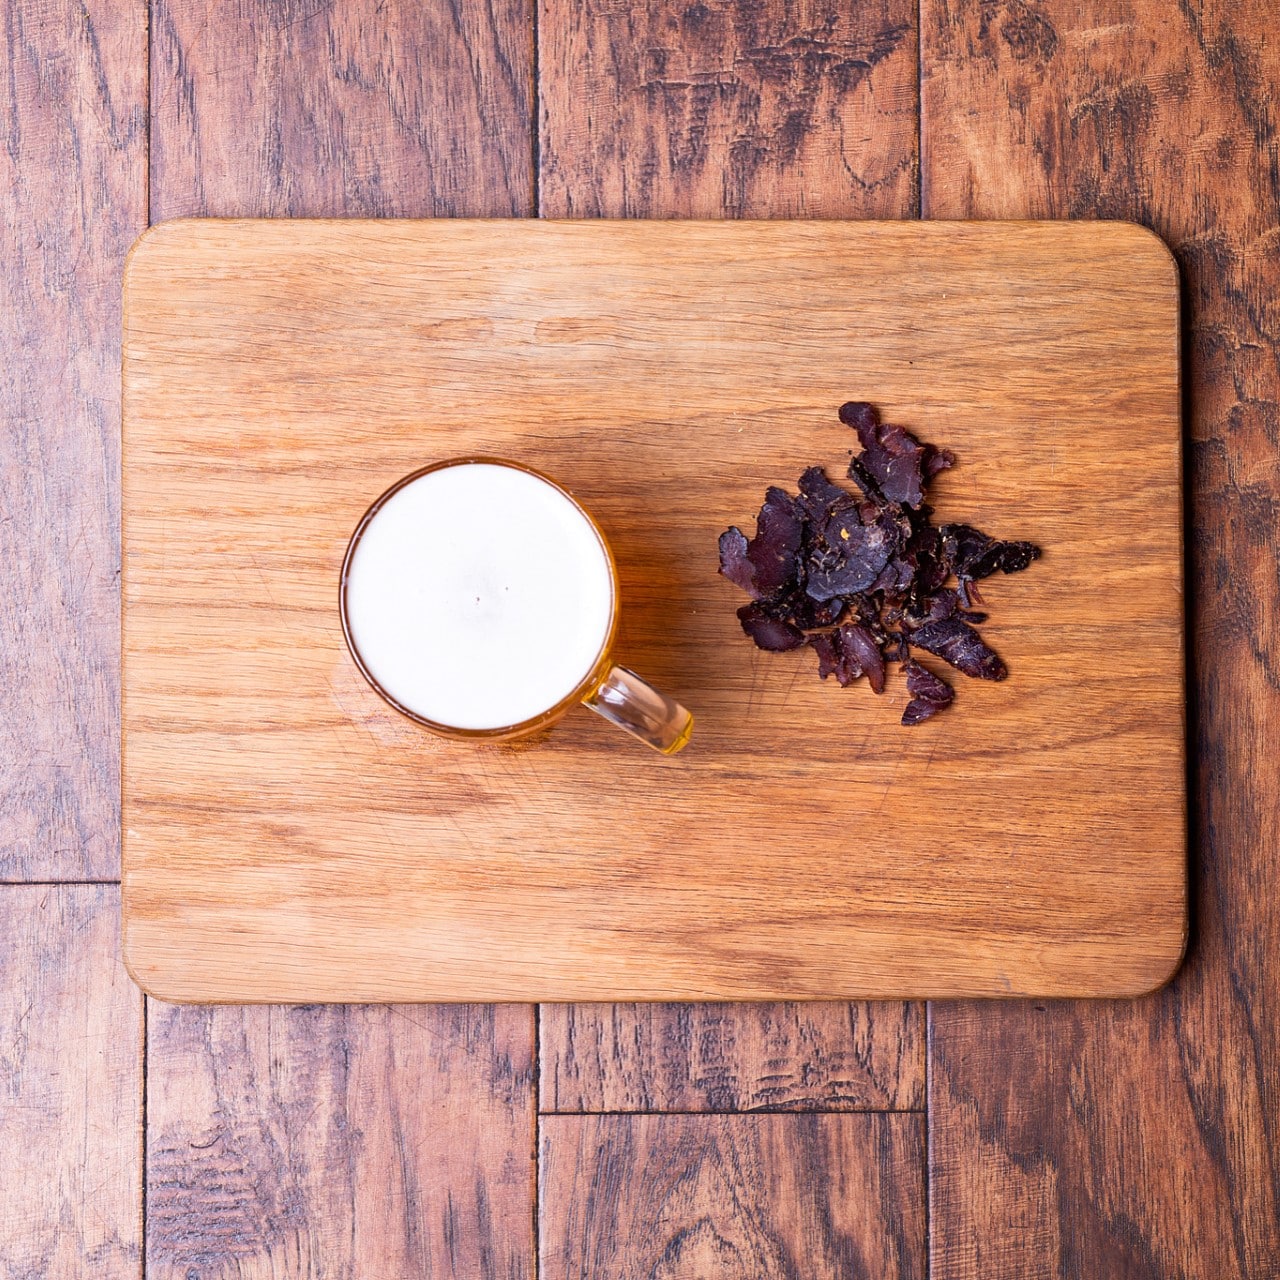 Biltong and drink on wooden chopping board